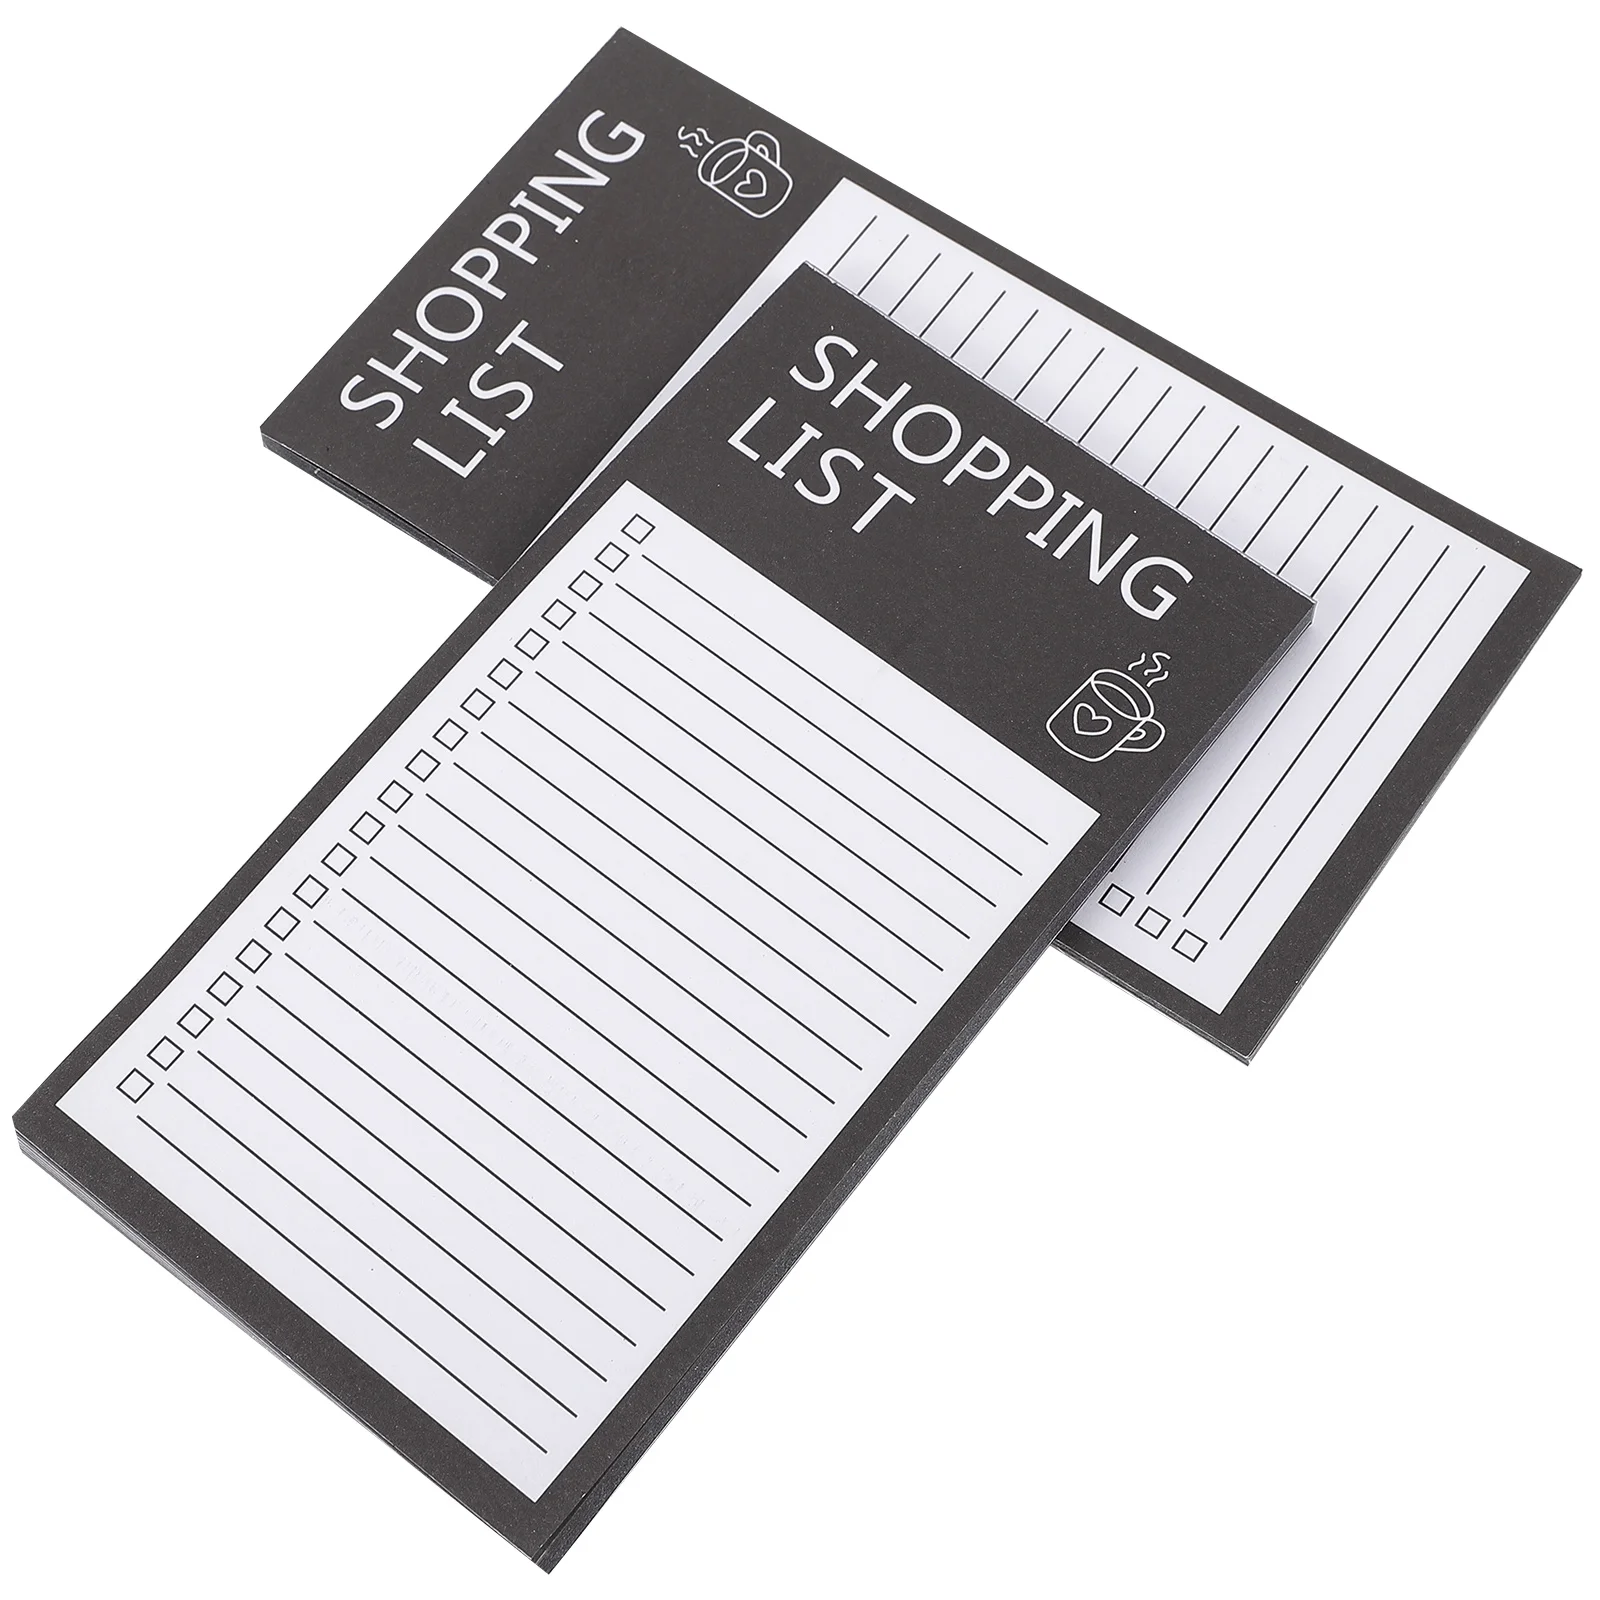 

Fridge Magnetic Notepads Memo Pads To Do List Shopping List Planner Grocery Sticker Message Board Notes Planning Notebook